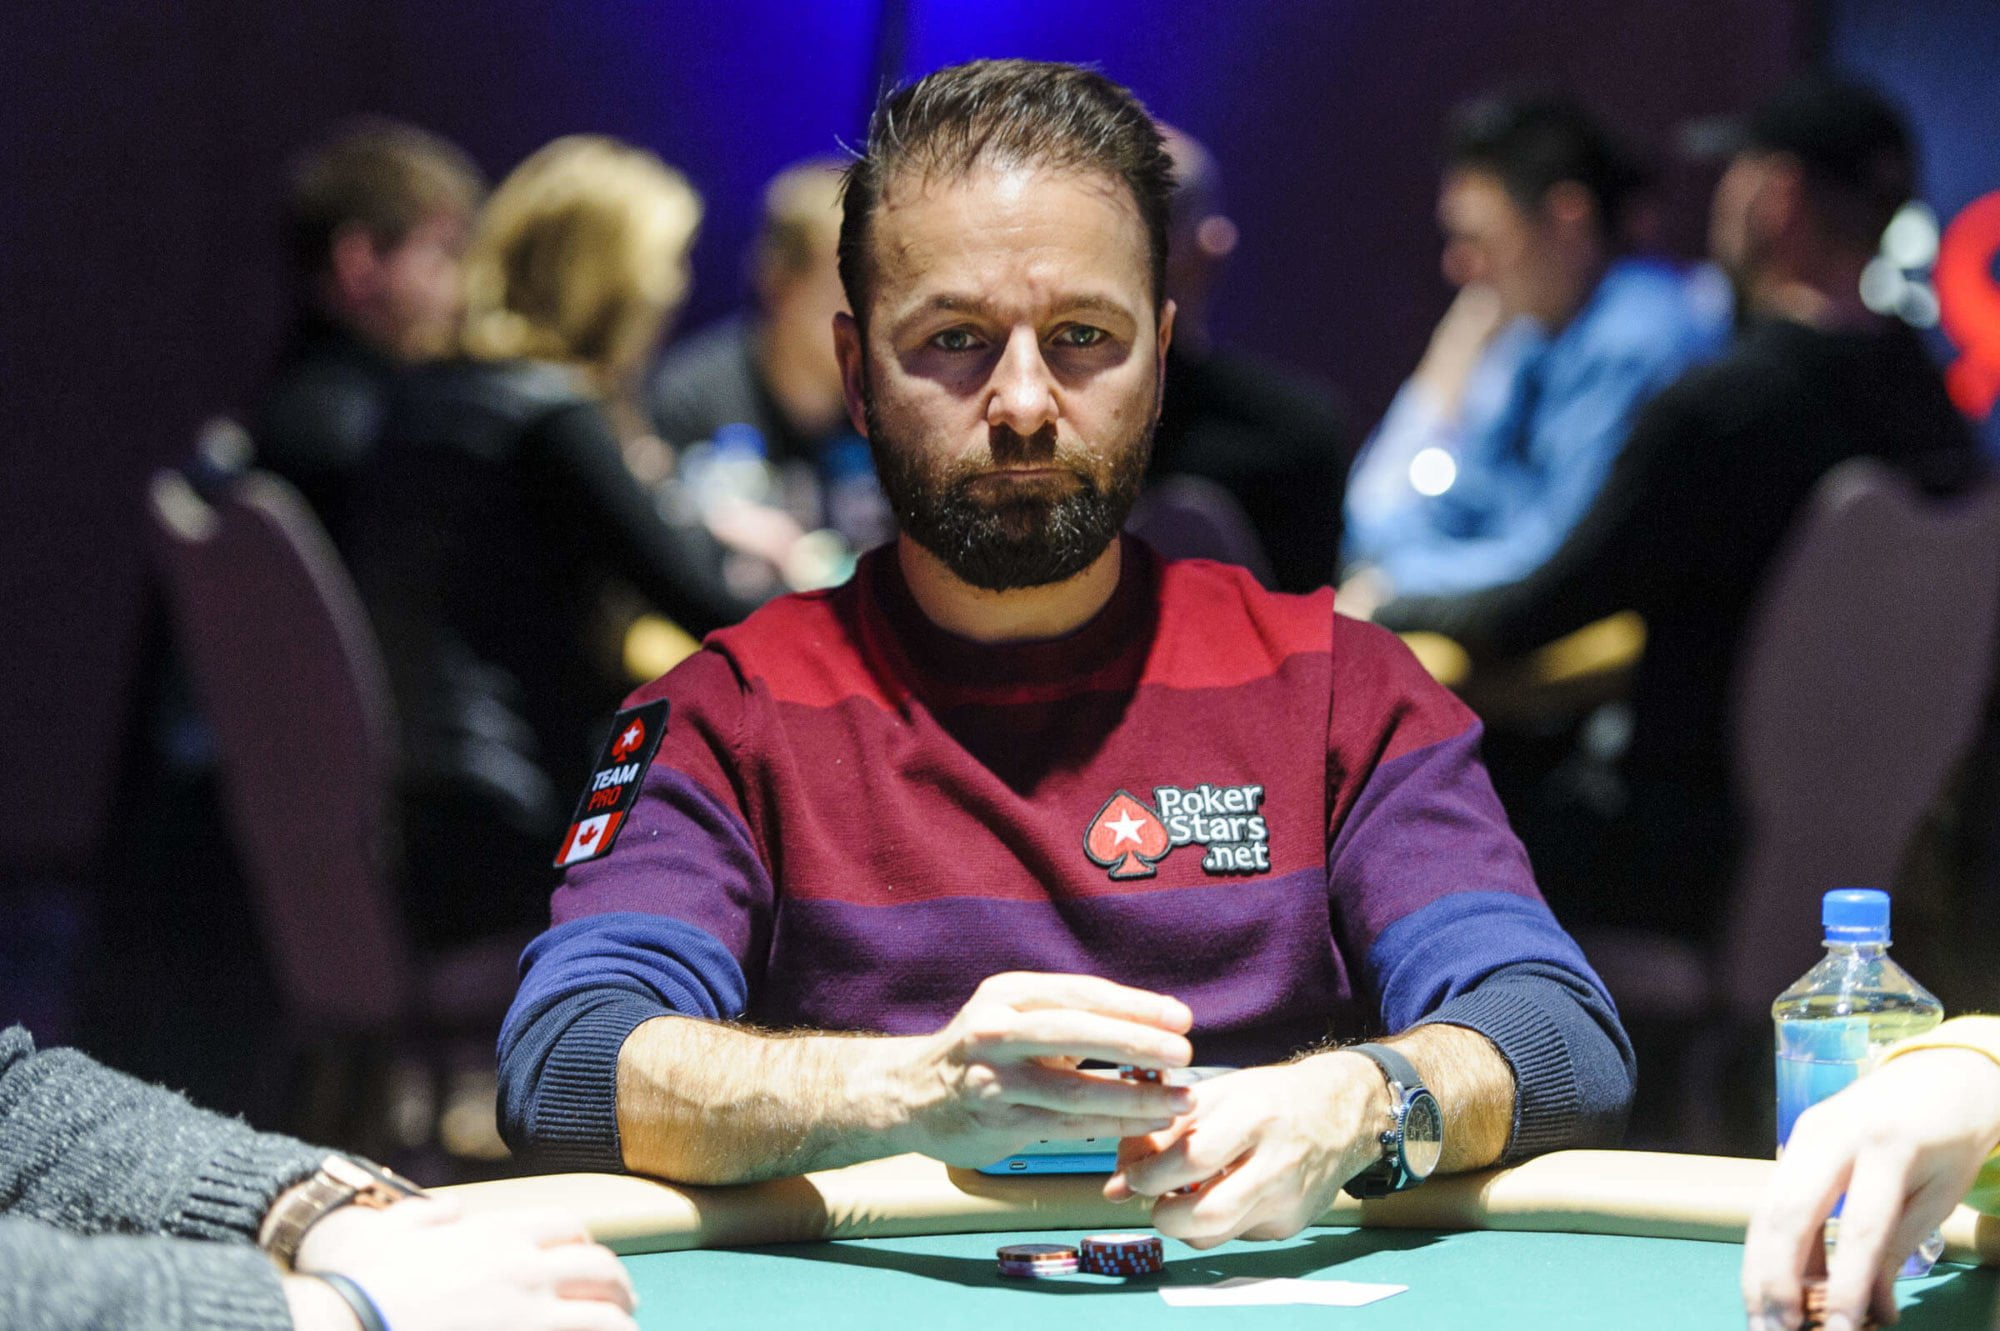 poker show with daniel negreanu and robl